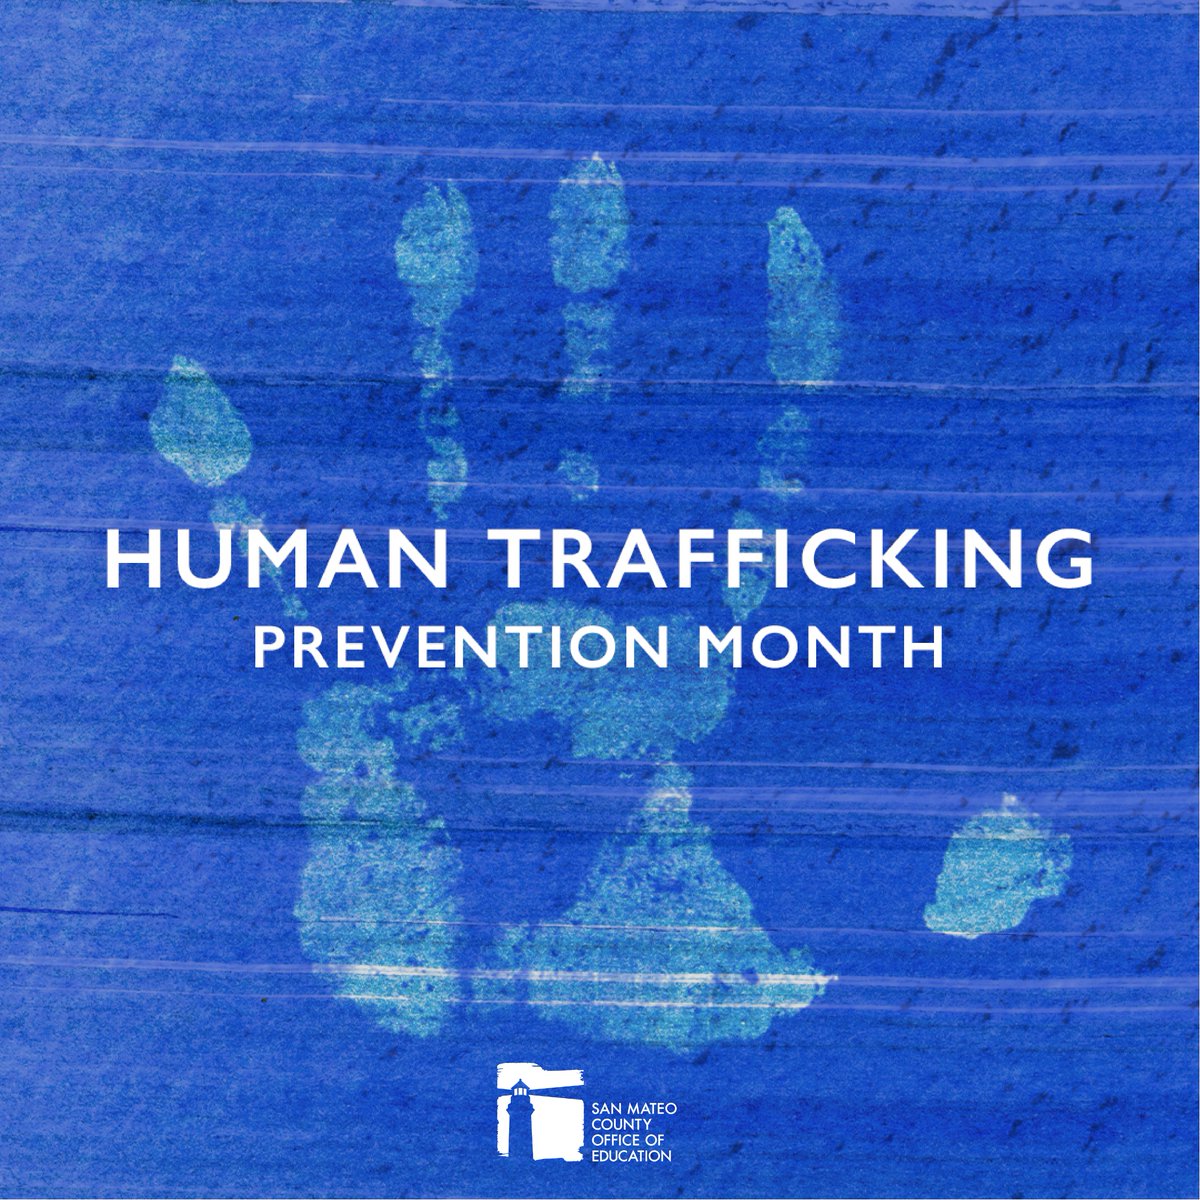 Nearly 30 million people worldwide are forced into #humantrafficking, and many of them are under the age of 18. This #humantraffickingprevention month, learn how to spot the signs of trafficking: bit.ly/3szObFK. #humantraffickingawareness @Hopeforjustice